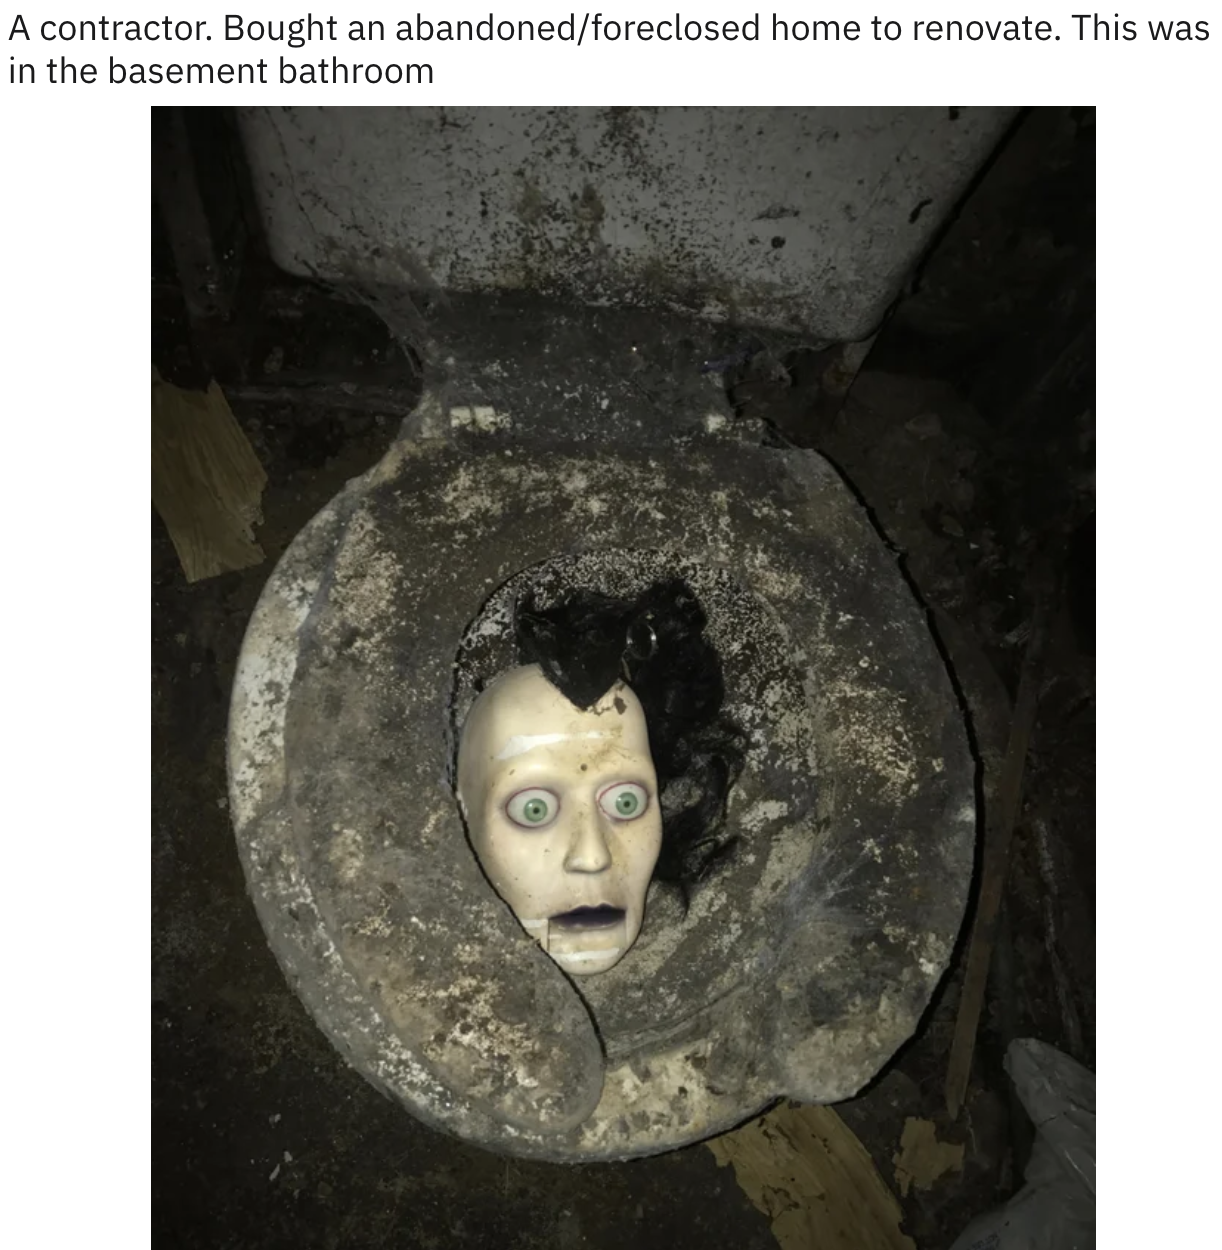 A face in an old toilet